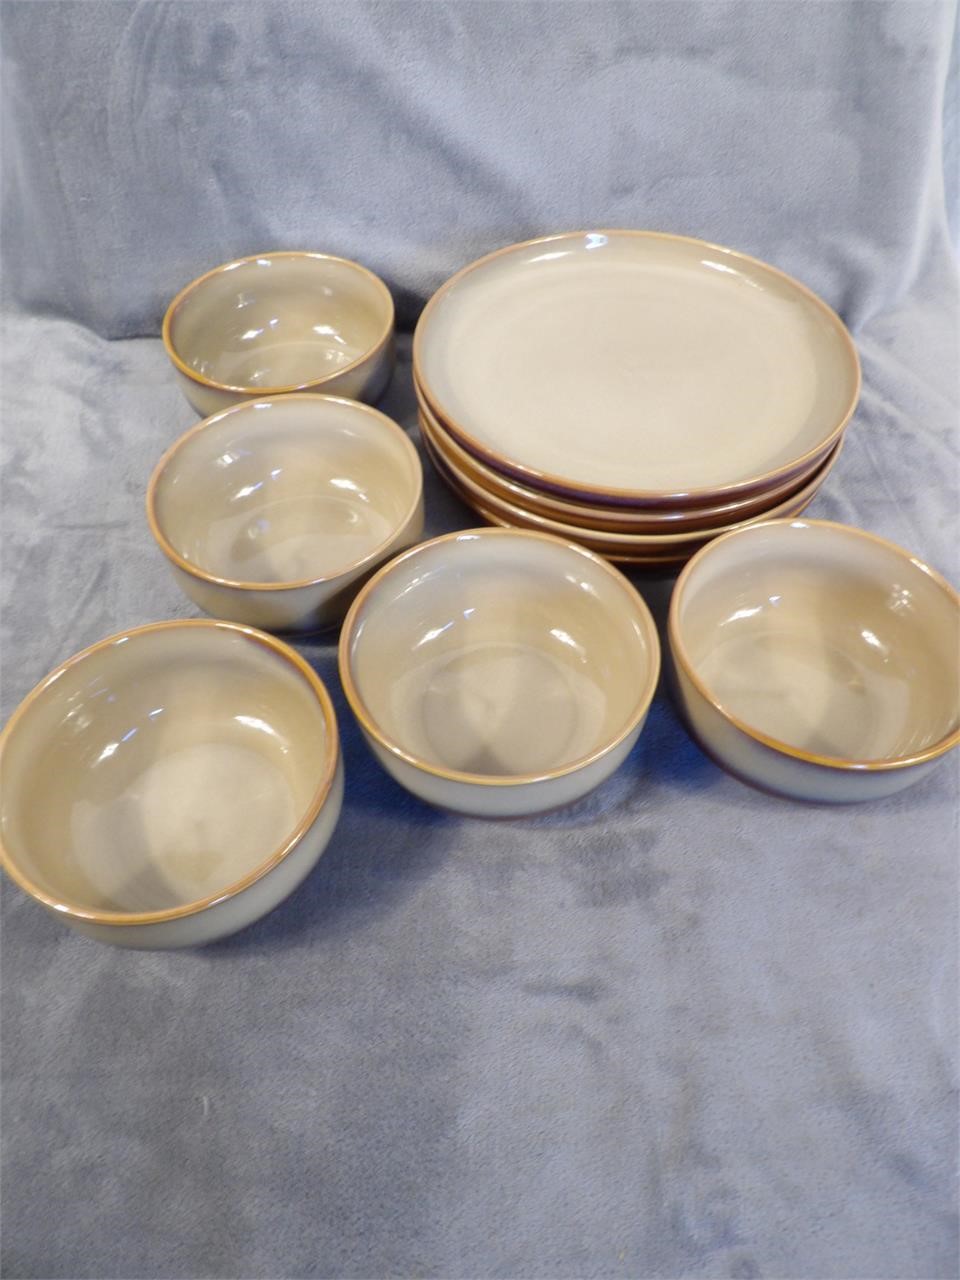 Dinner Plates and Cereal Bowls